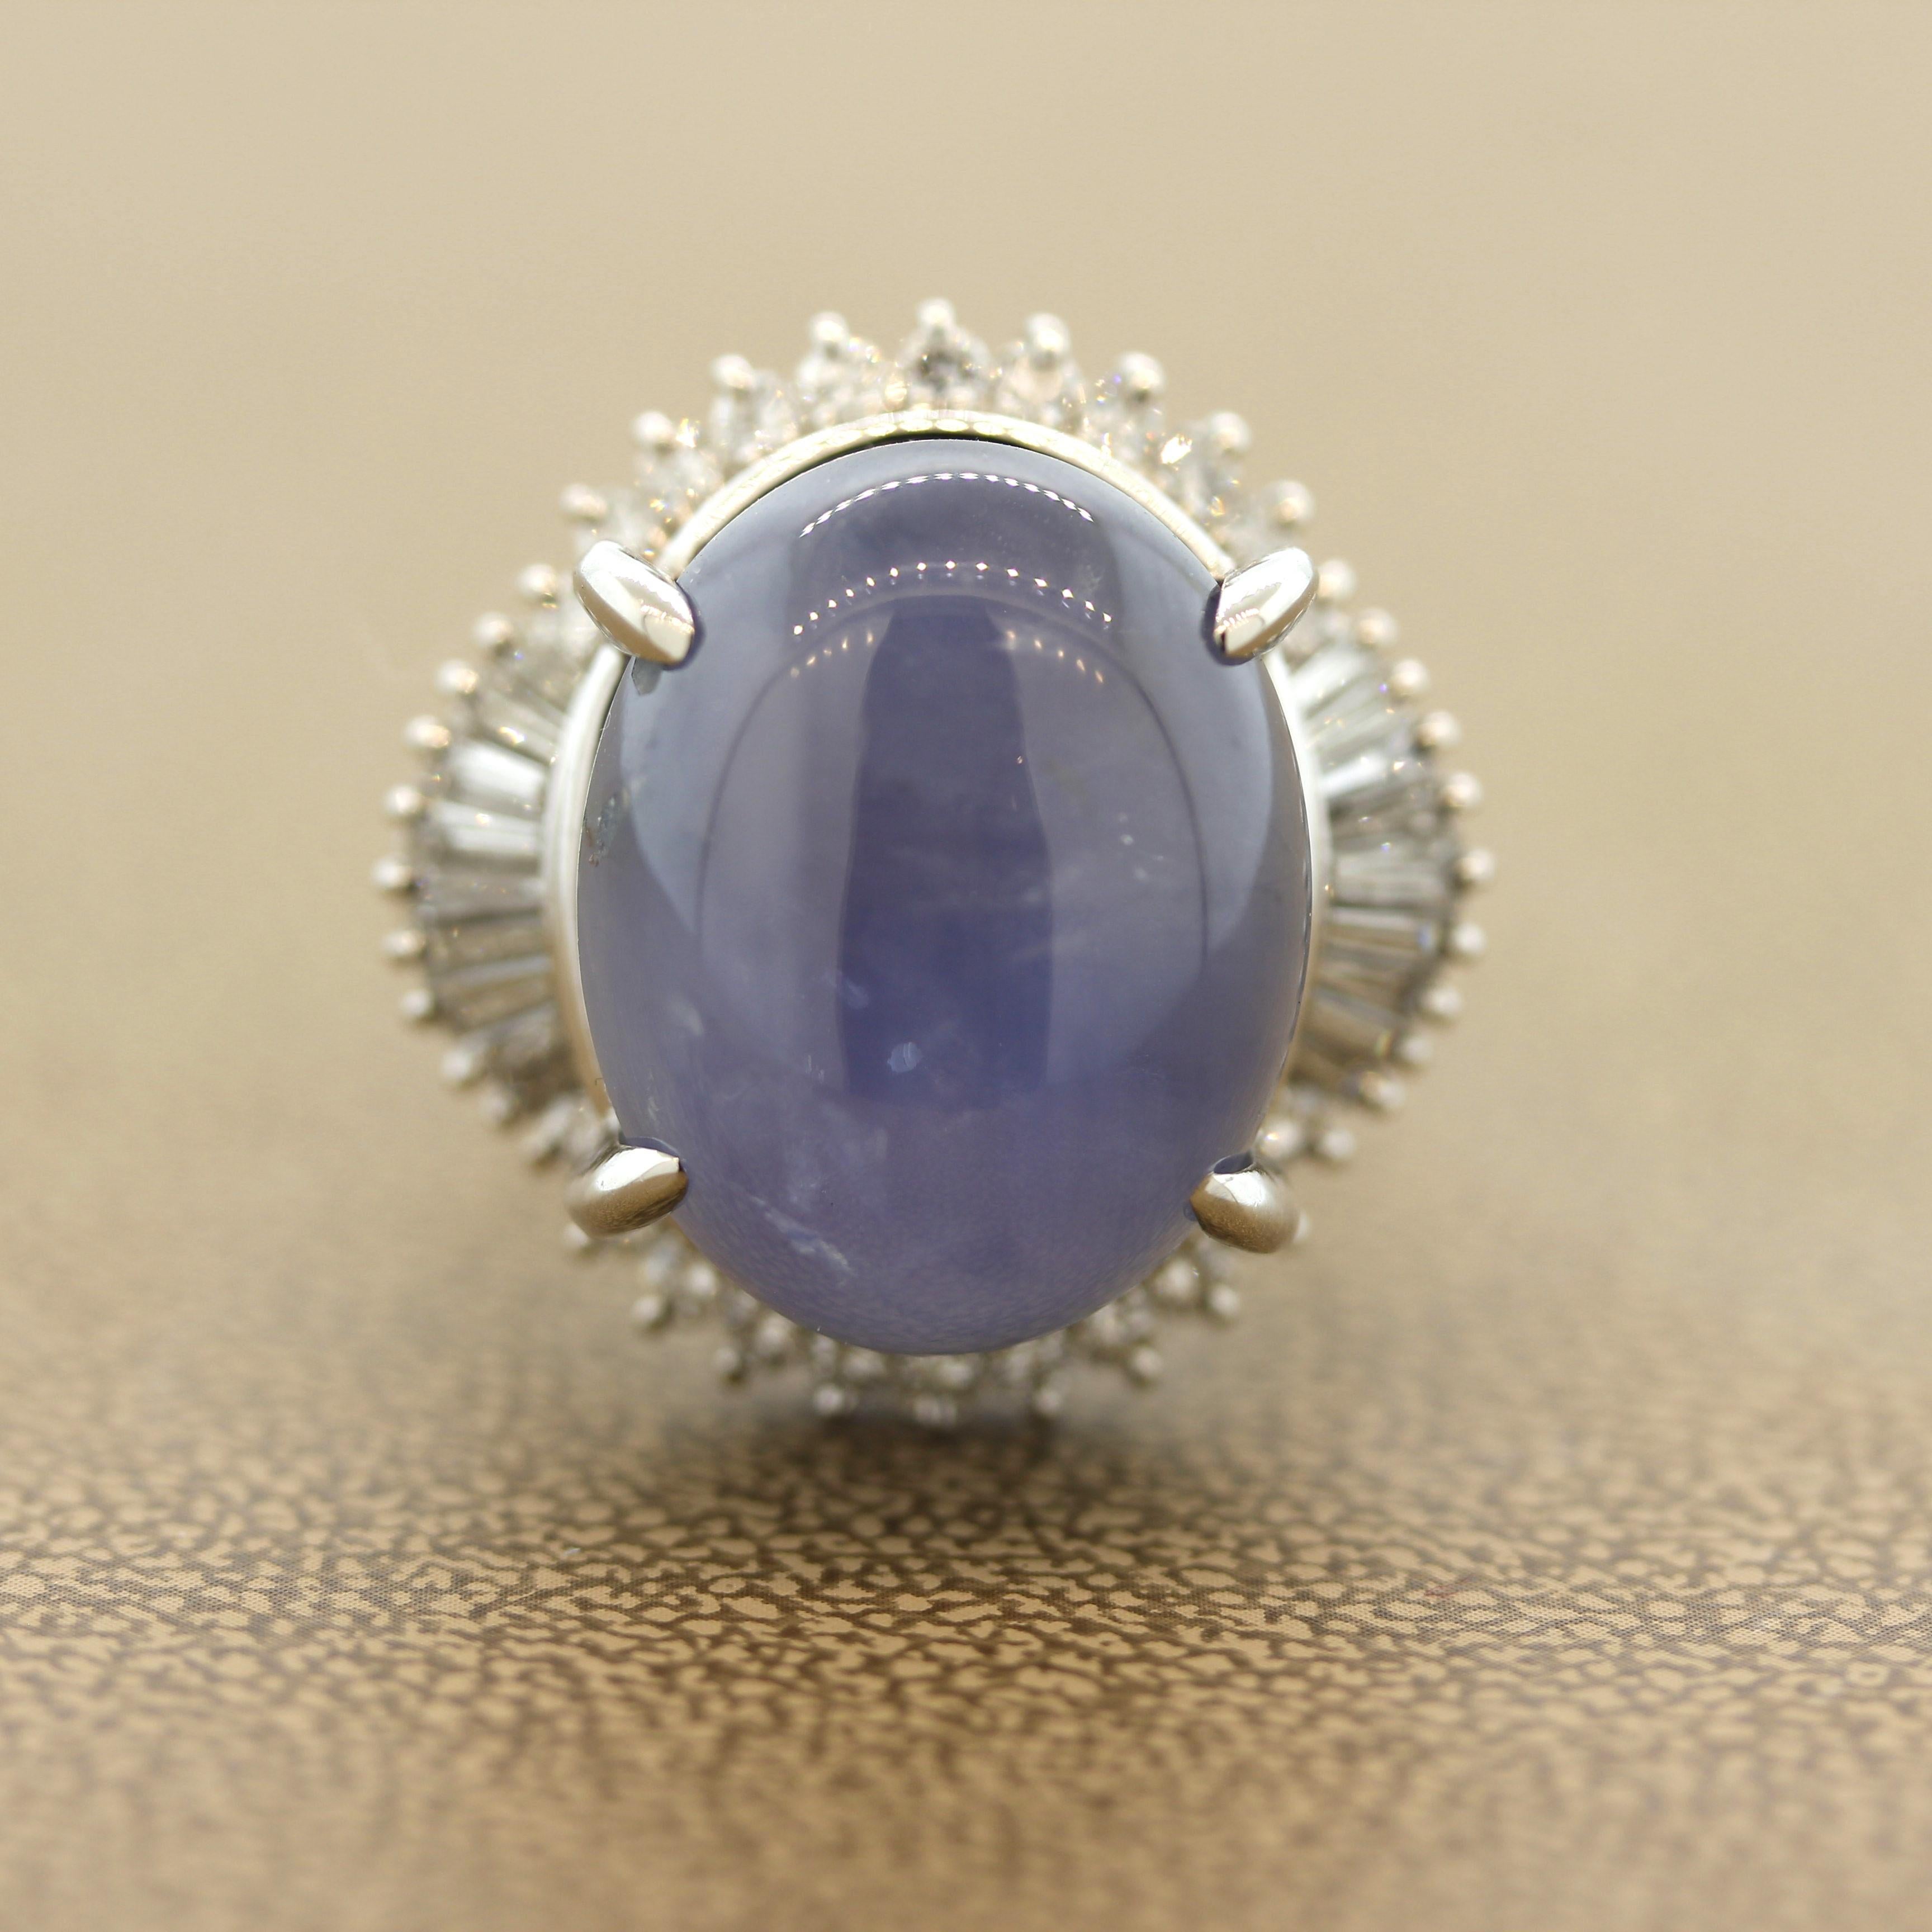 An impressive gem blue sapphire weighing a substantial 40.20 carats! A real great combination of size and quality as the sapphire has excellent translucency along with a bright blue color and great asterism. A strong 6-rayed star can be seen across